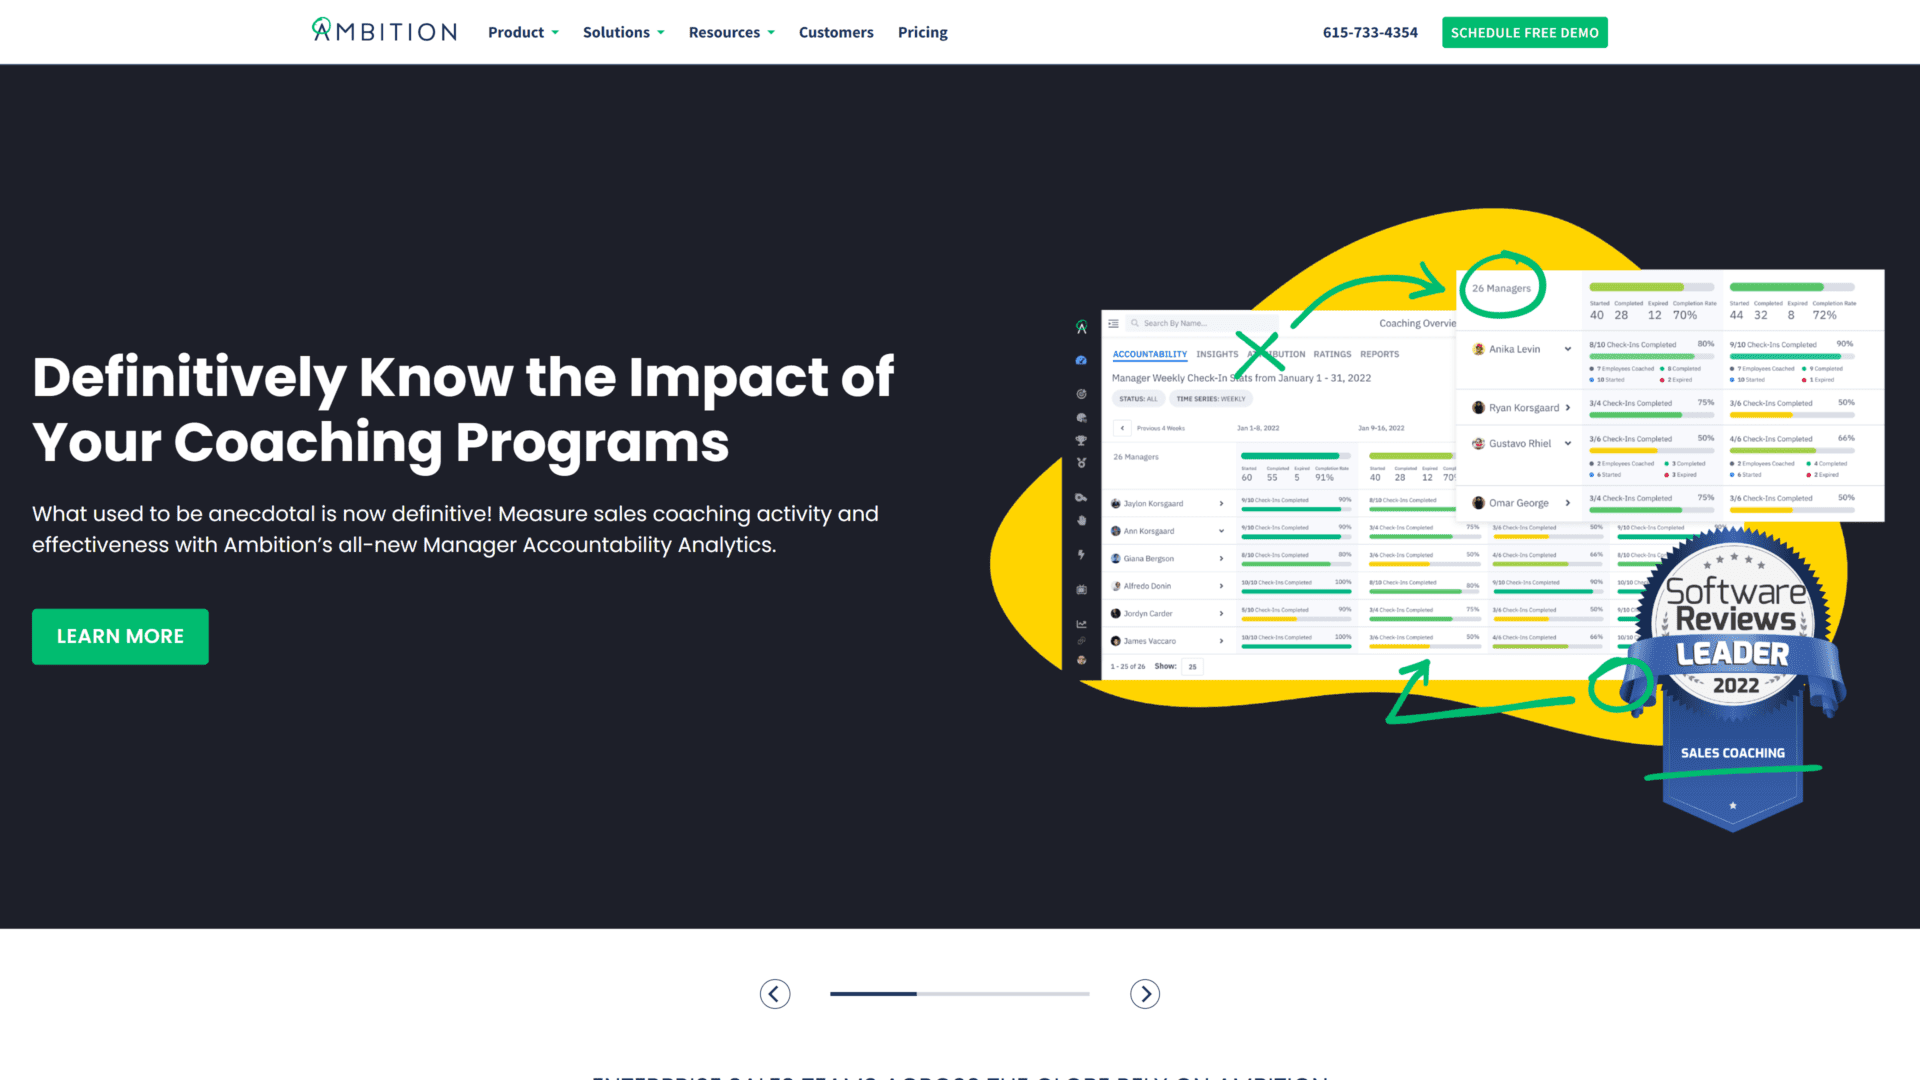 A screenshot of the ambition homepage